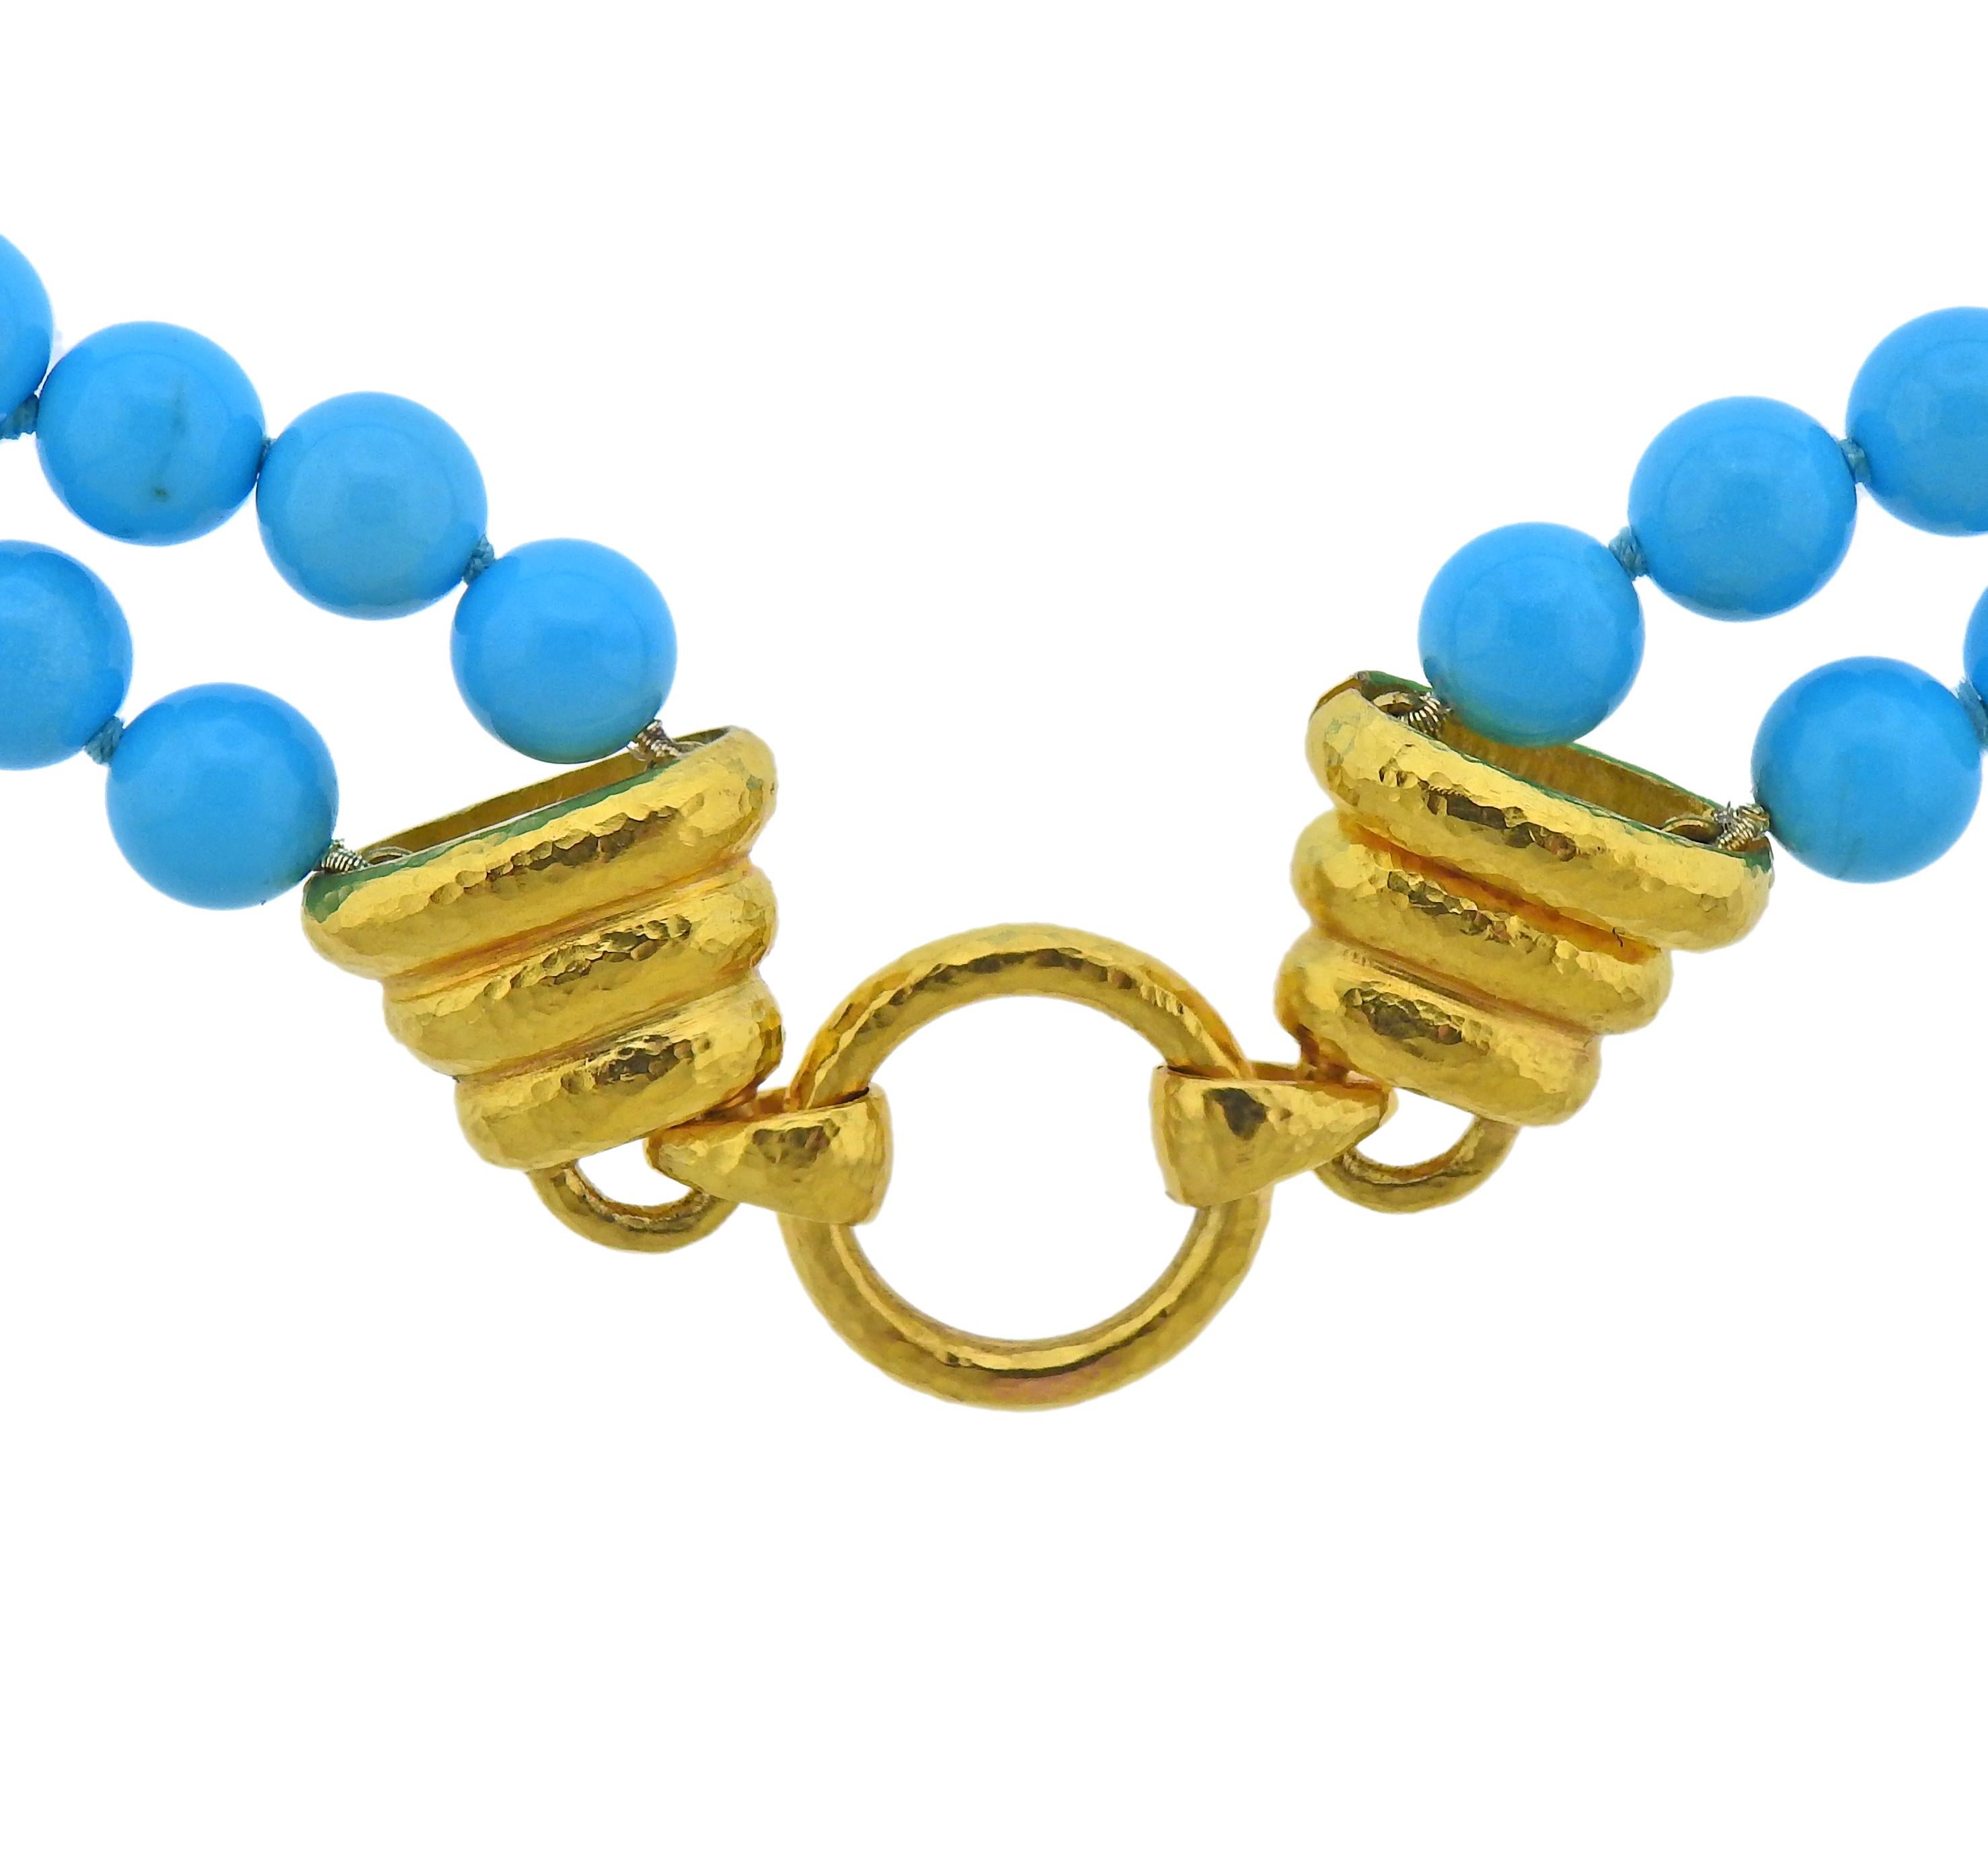 Elizabeth Locke 19k gold double strand necklace with 7mm turquoise beads. Necklace is 17 1/8